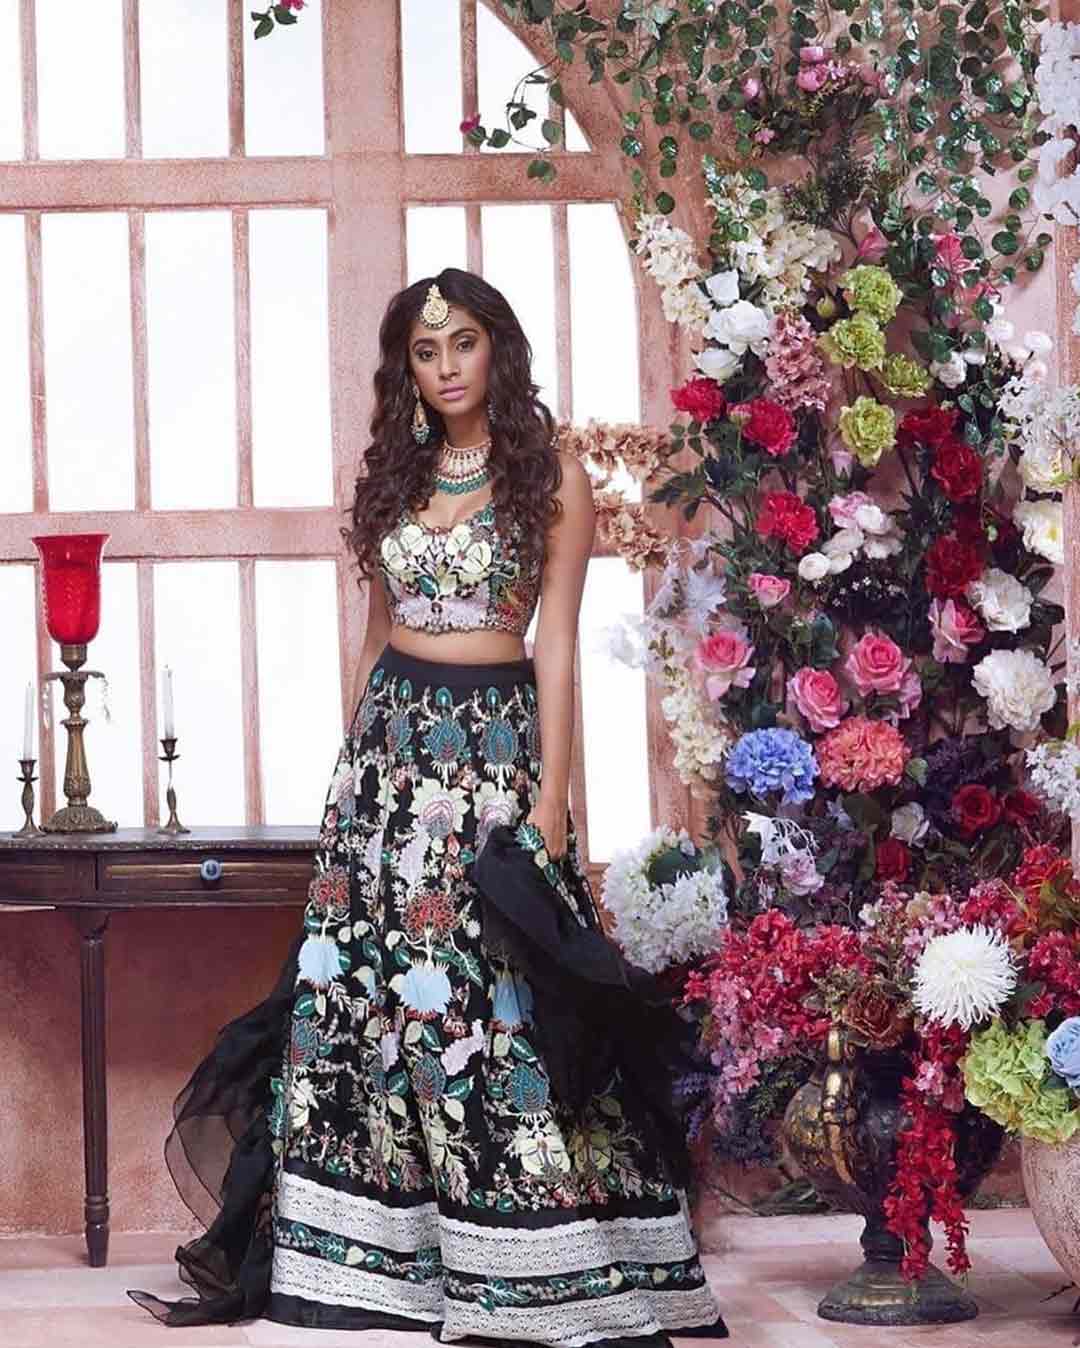 When she competed in the 2018 Femina Miss India pageant, Vas was also crowned Beauty with a purpose and Miss Beautiful Smile. Here, she is wearing an Aisha Rao lehenga for a photoshoot.